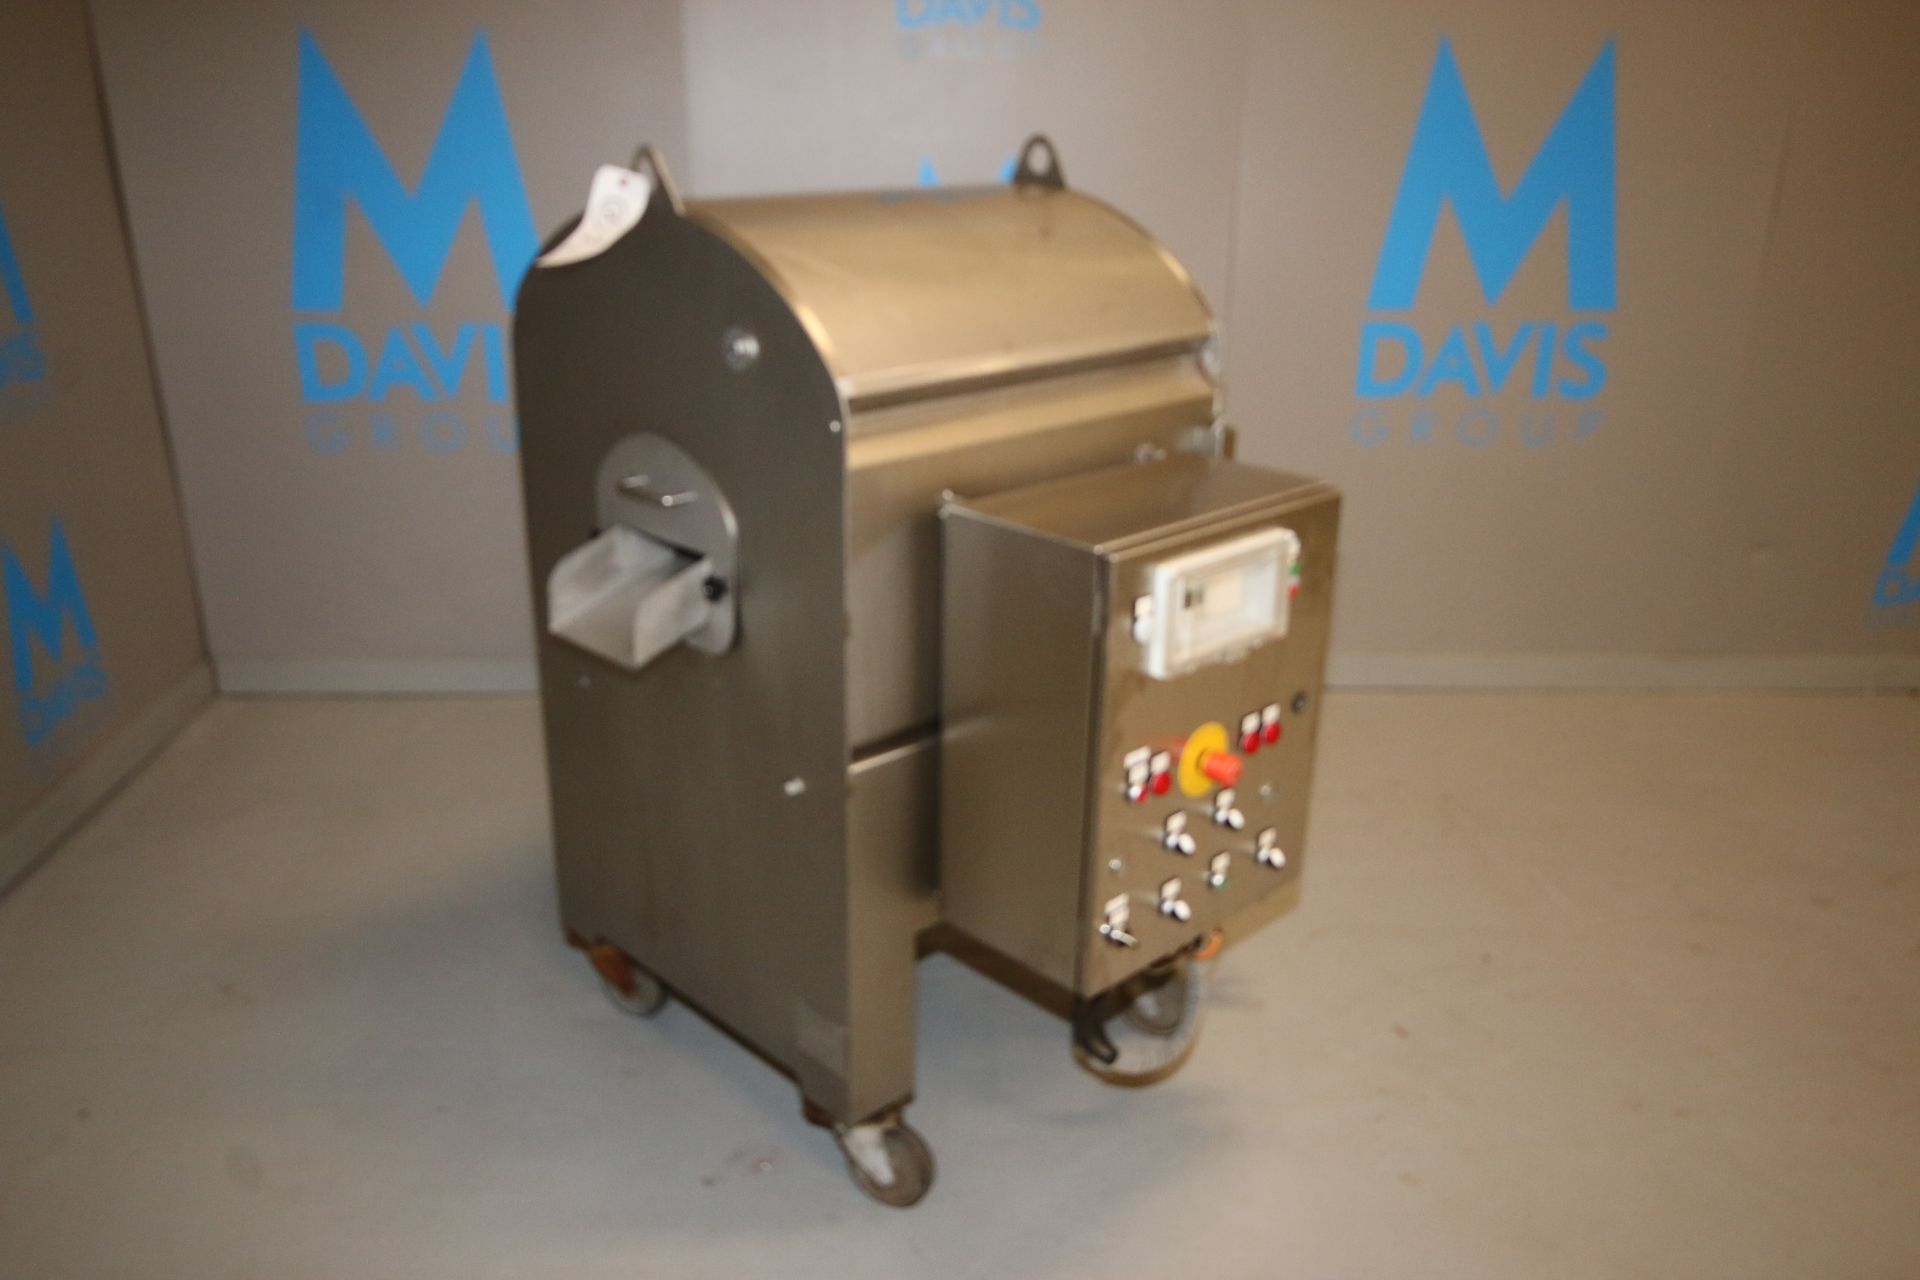 2012 Le Materiel Pera S/S Sifter, Type PRF600, S/N 105583, with PALL S/S Filter, Aprox. 21" L x 3-